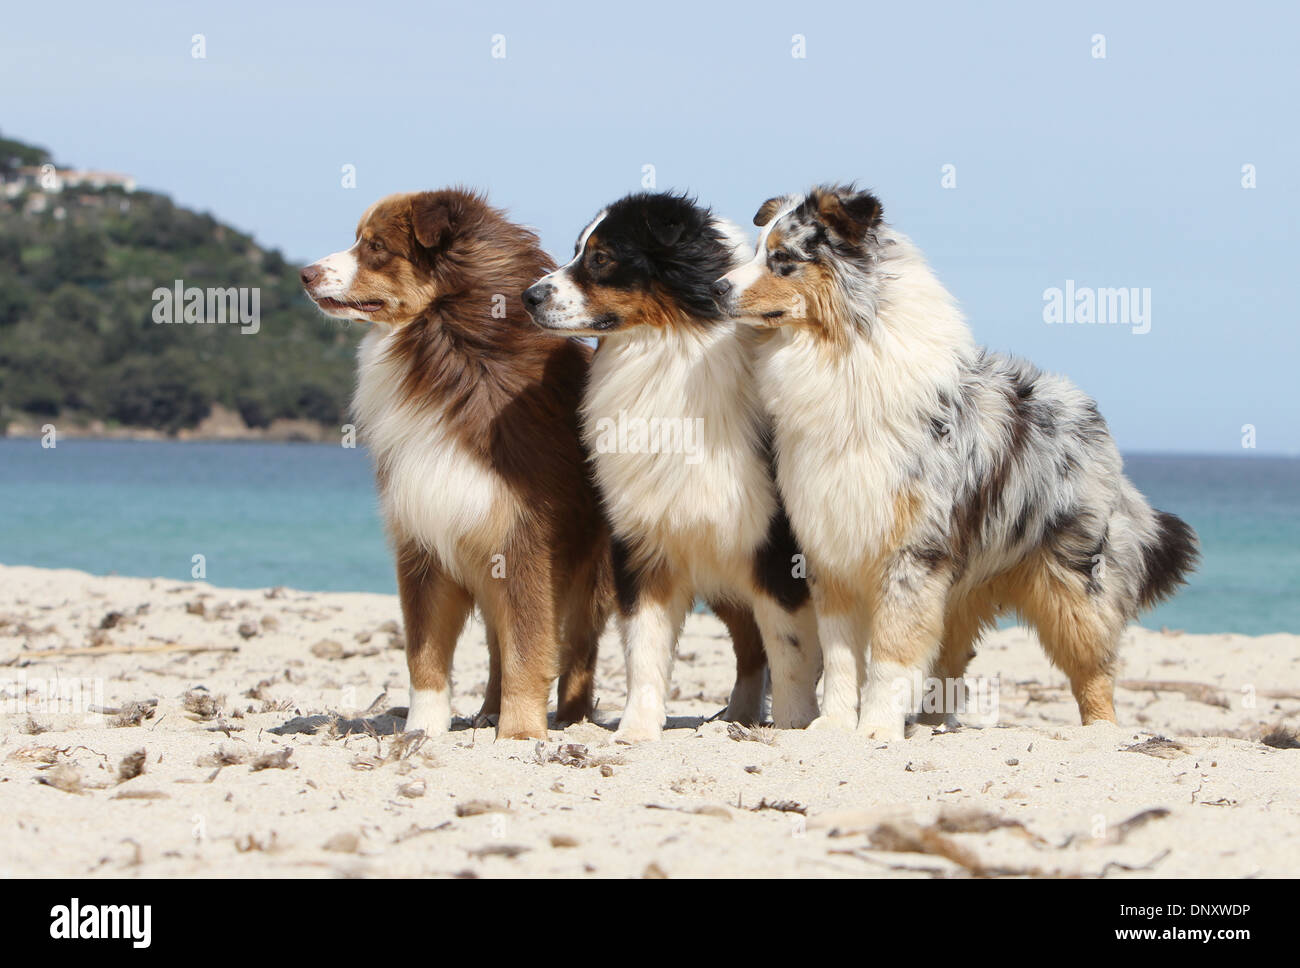 Almægtig trug forfremmelse Dog Australian shepherd / Aussie Three adults (different colors) standing  on the beach Stock Photo - Alamy